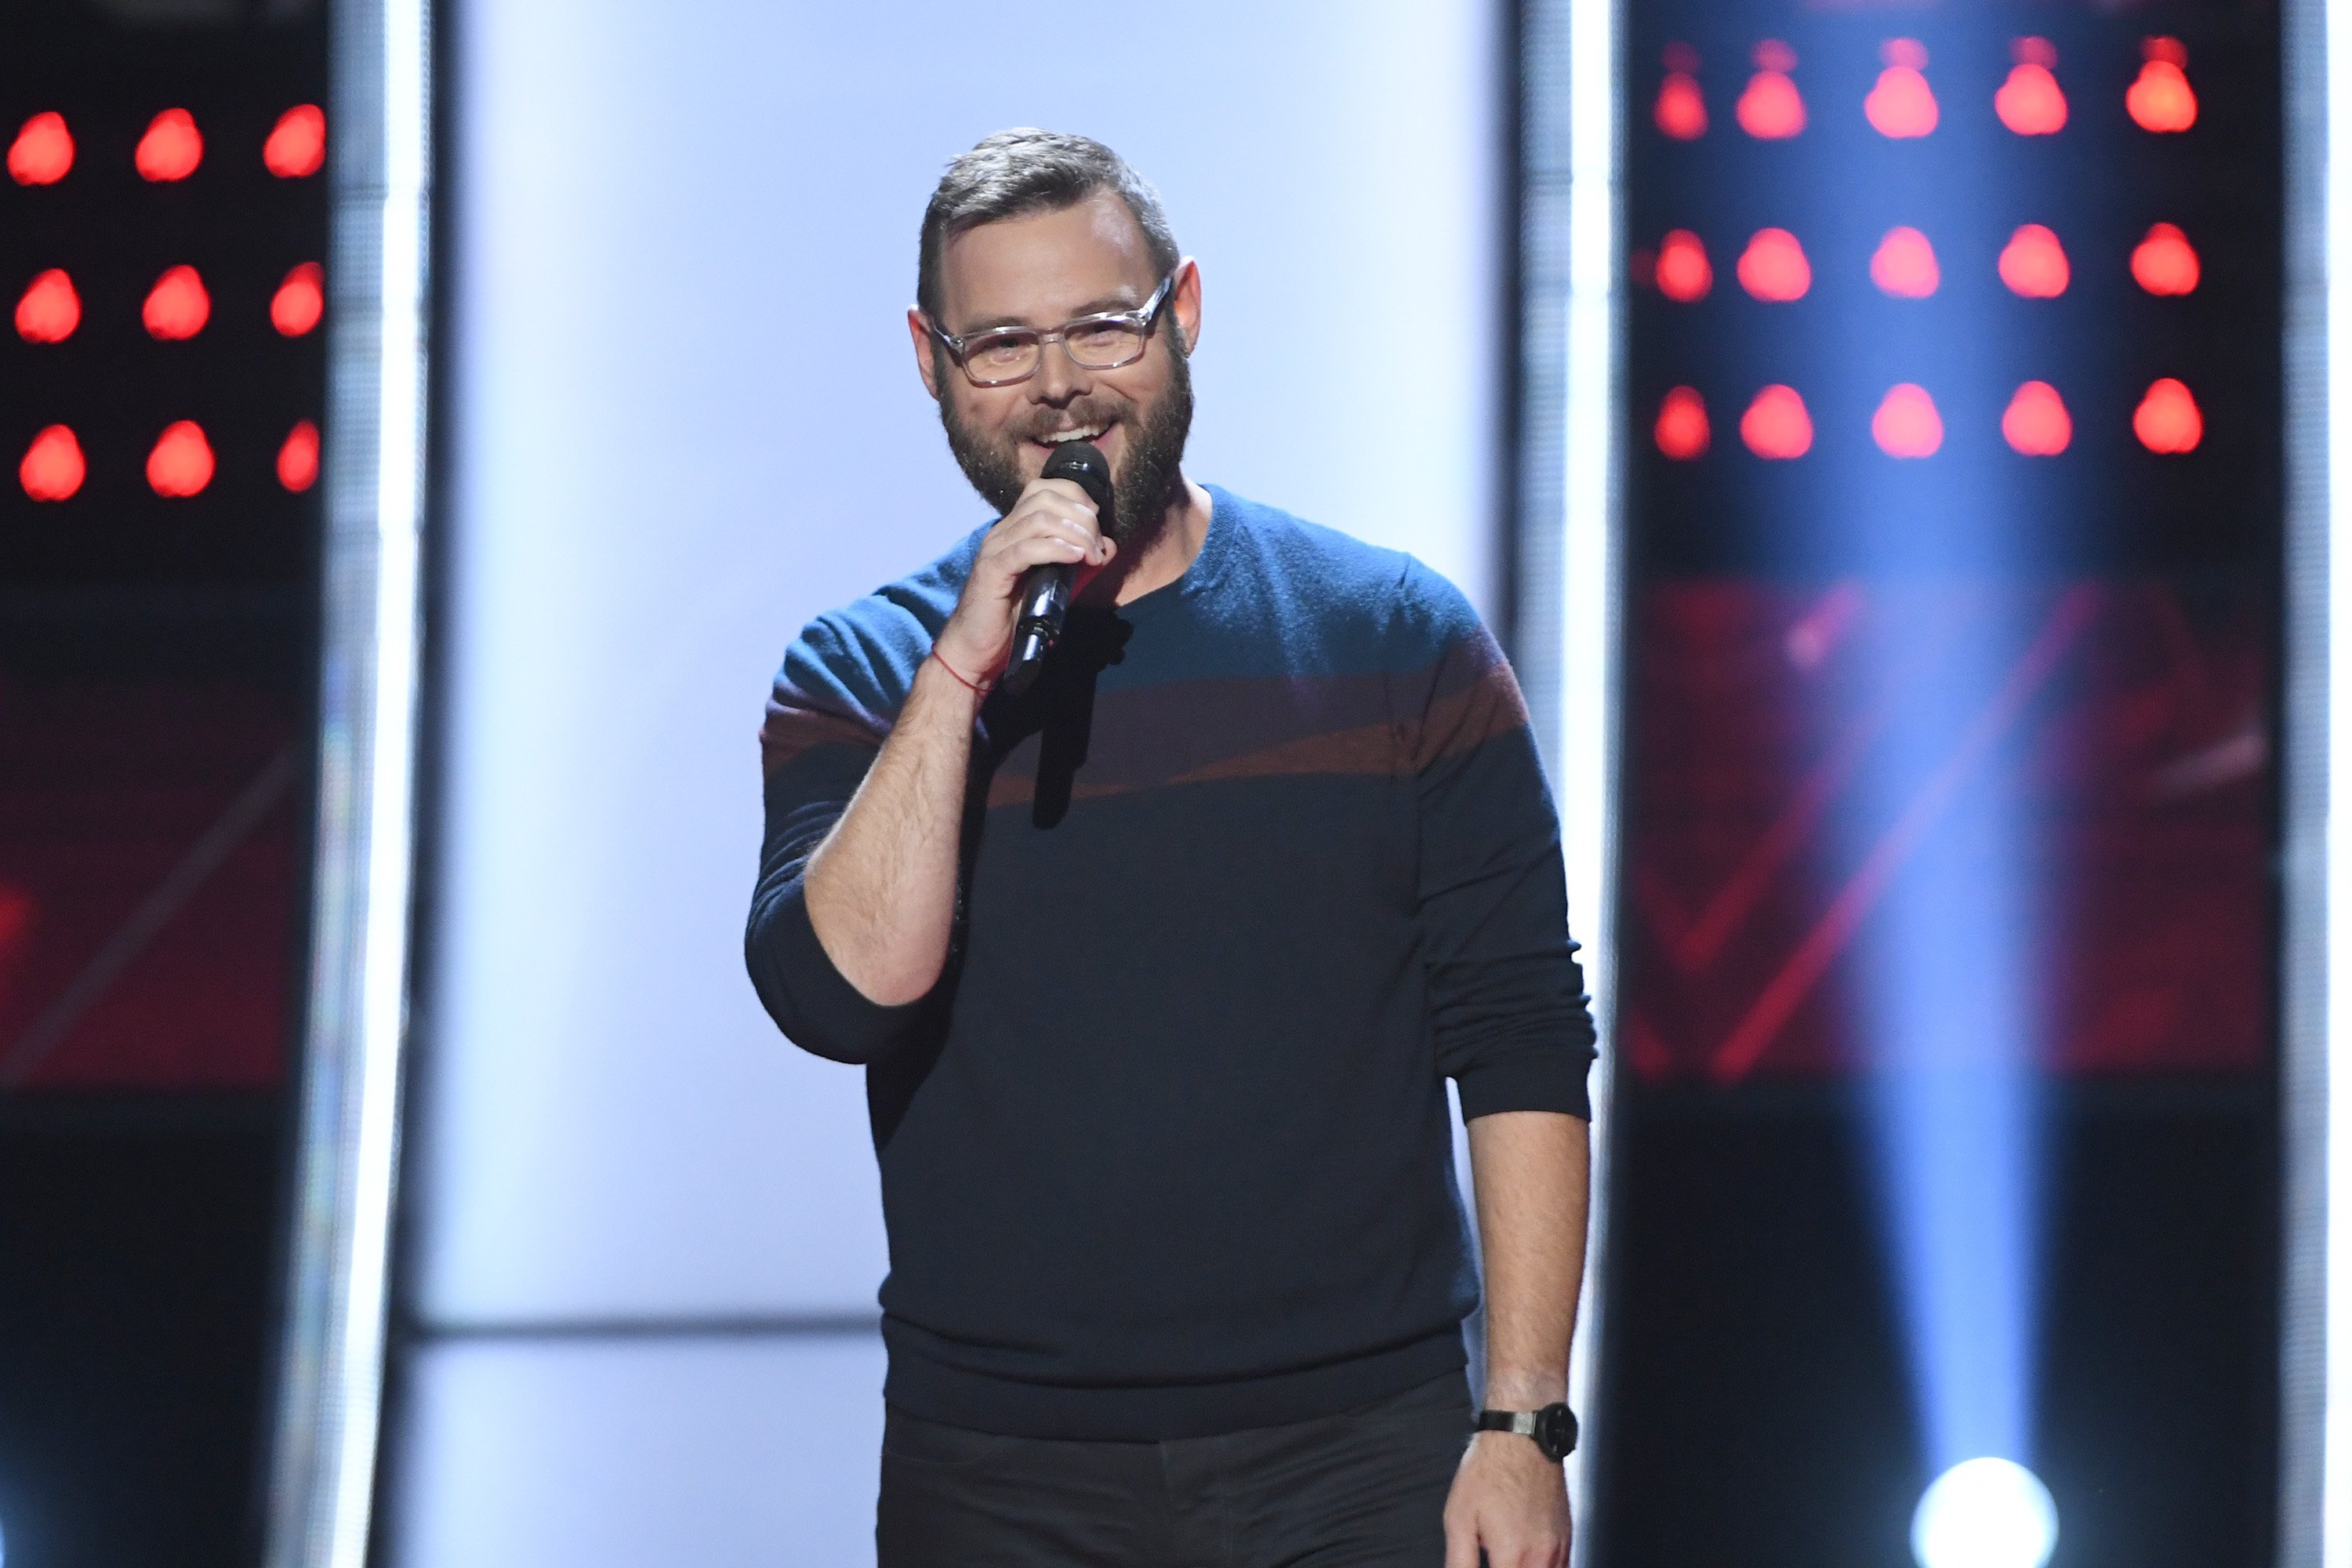 THE VOICE -- "Blind Auditions" Episode 1801 -- Pictured: Todd Tilghman | Photo: Getty Images